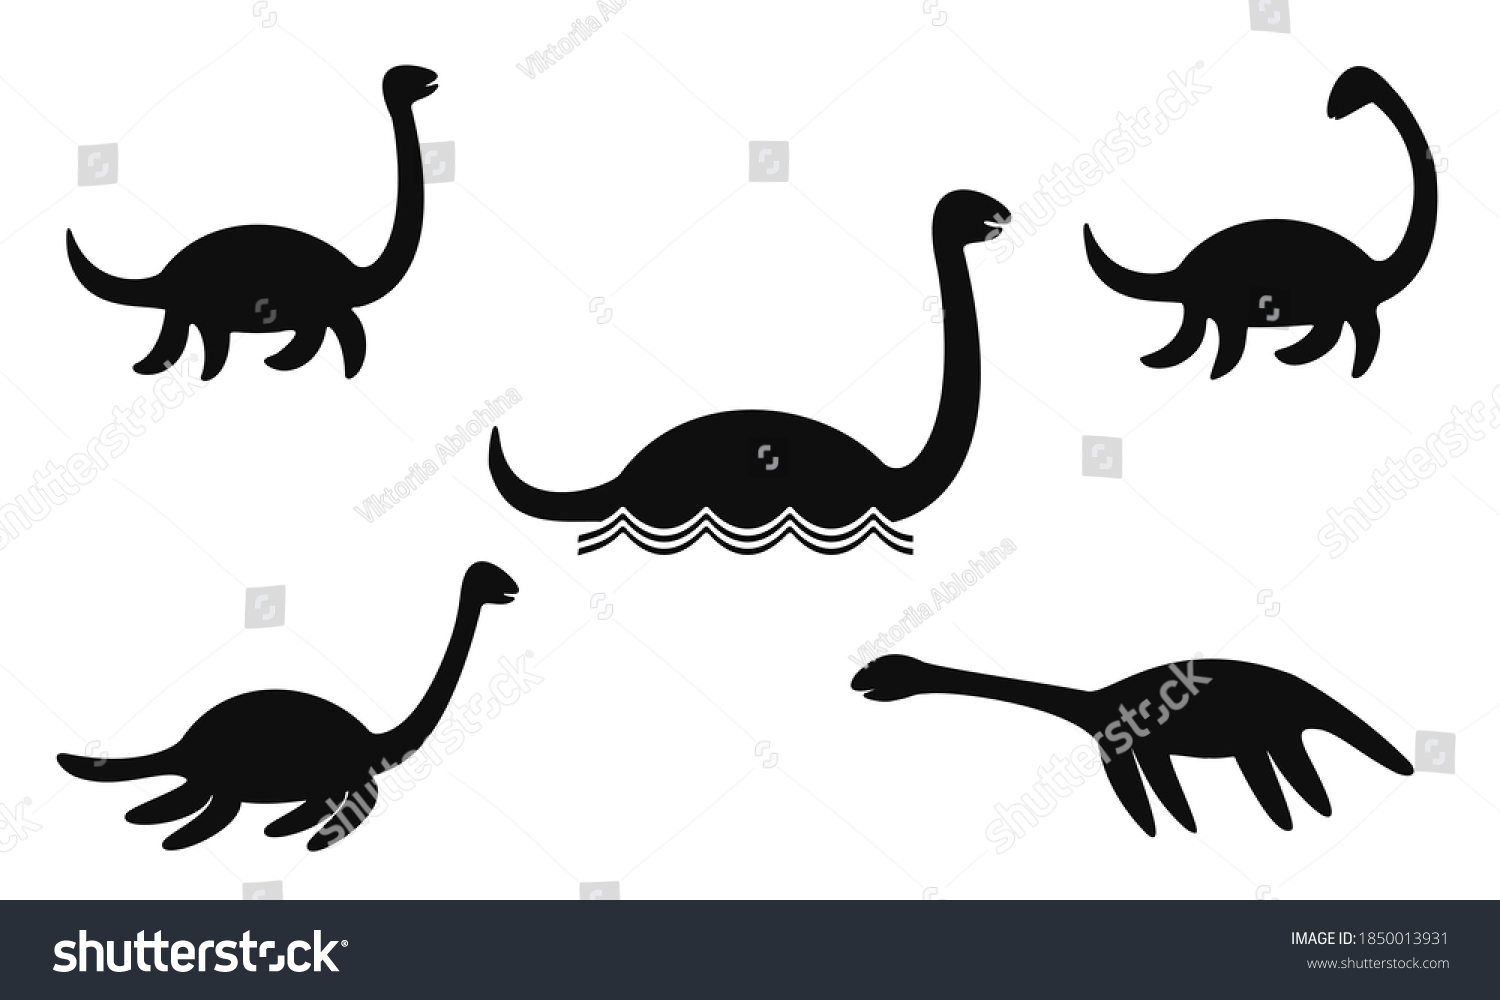 SVG of Set of Nessie or Loch Ness monster silhouettes isolated on white backgroung. Vector illustration. svg